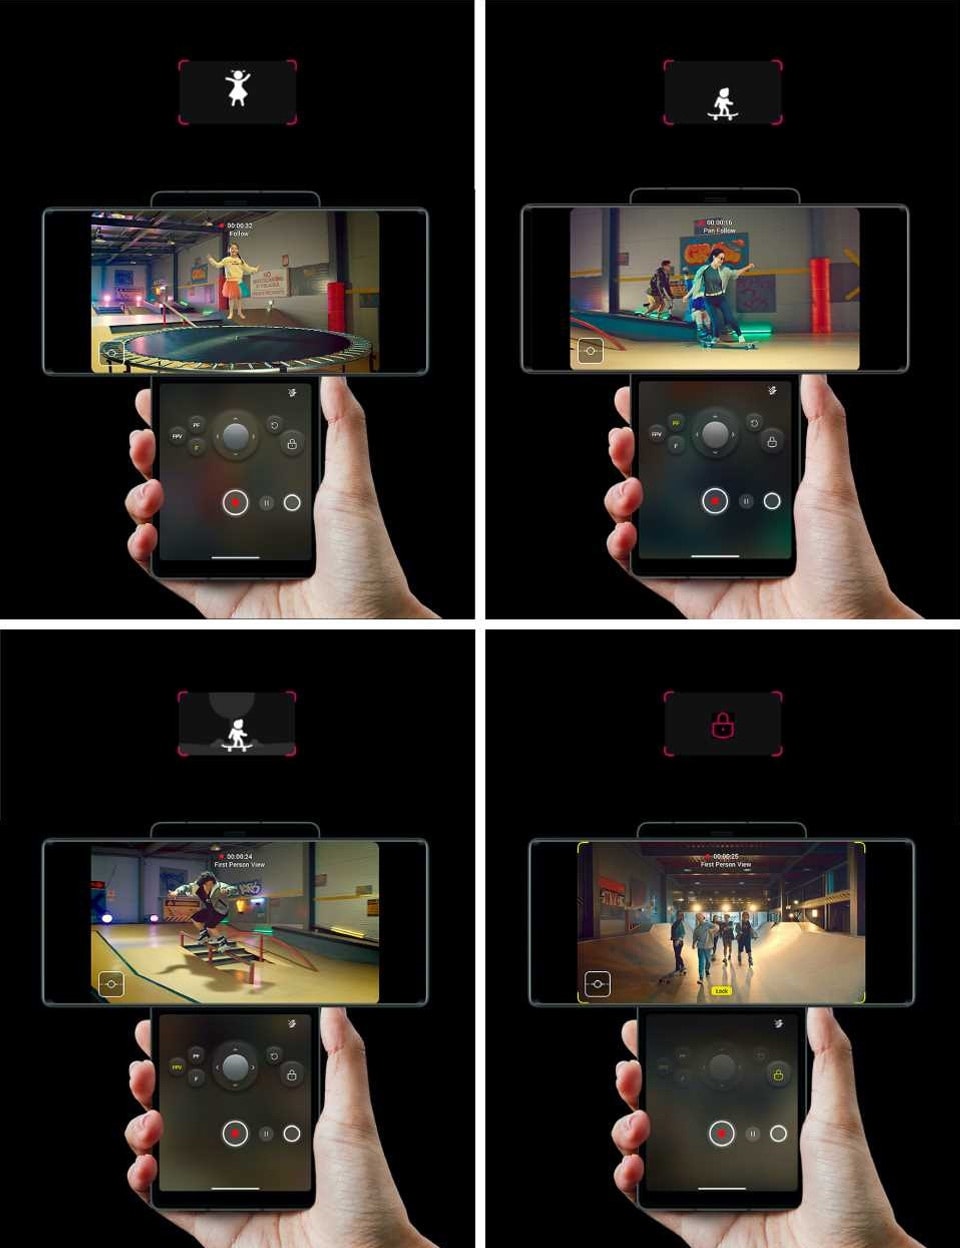 The four different recording modes available with the gimbal motion camera feature of the LG WING